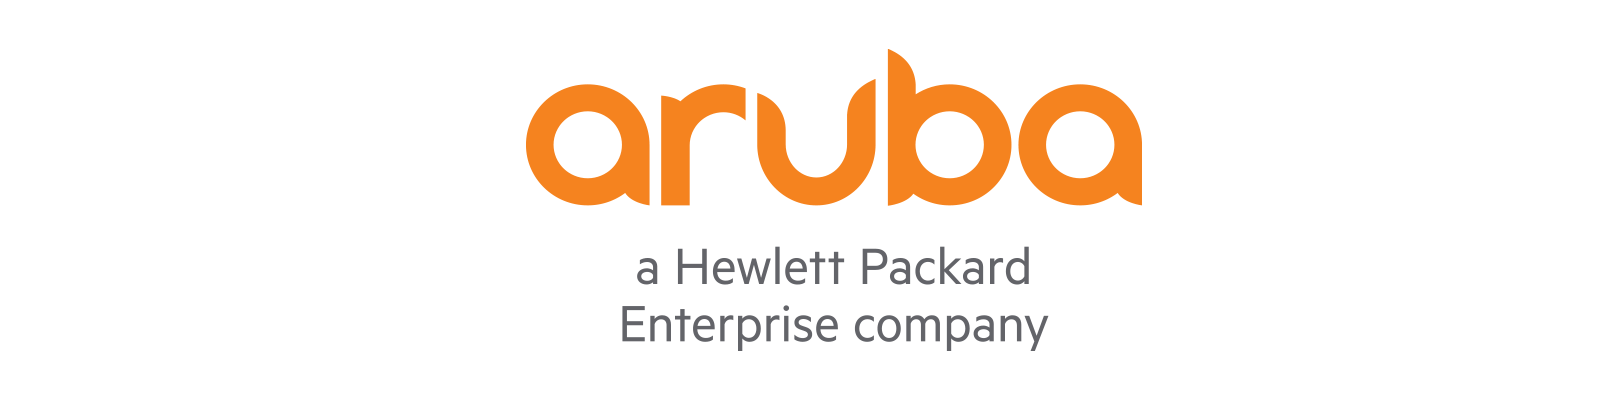 HP Corporate Logo - Aruba | Enterprise Networking and Security Solutions